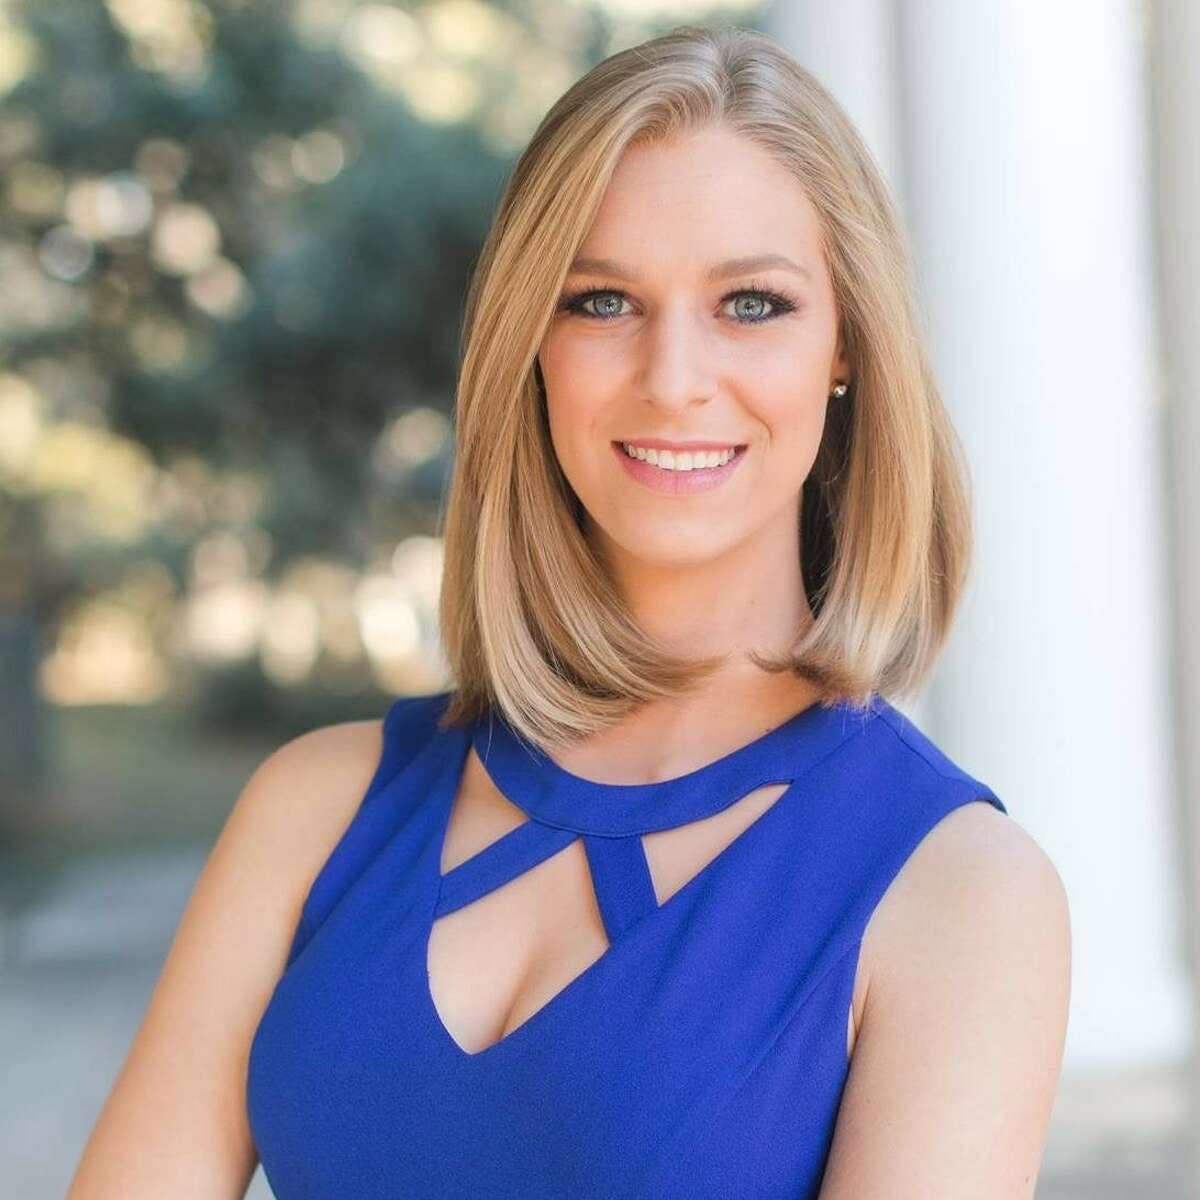 'It was a total surprise:' KENS5 morning anchor Sarah Forgany expecting ...